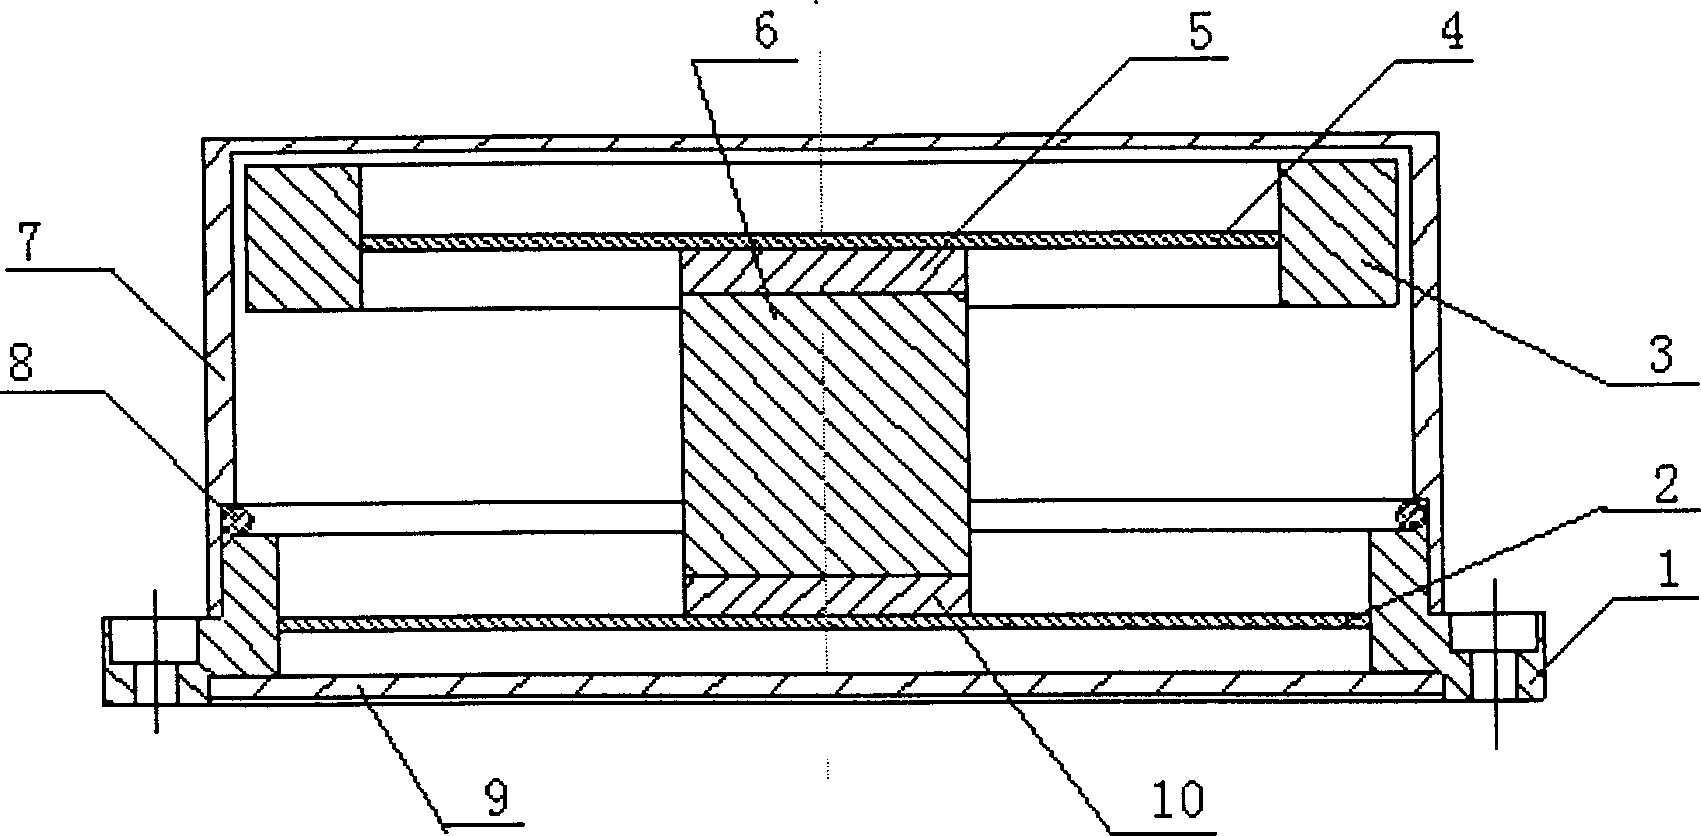 Six-axle acceleration sensor with dual E-shaped circular membranes and cross beam structure